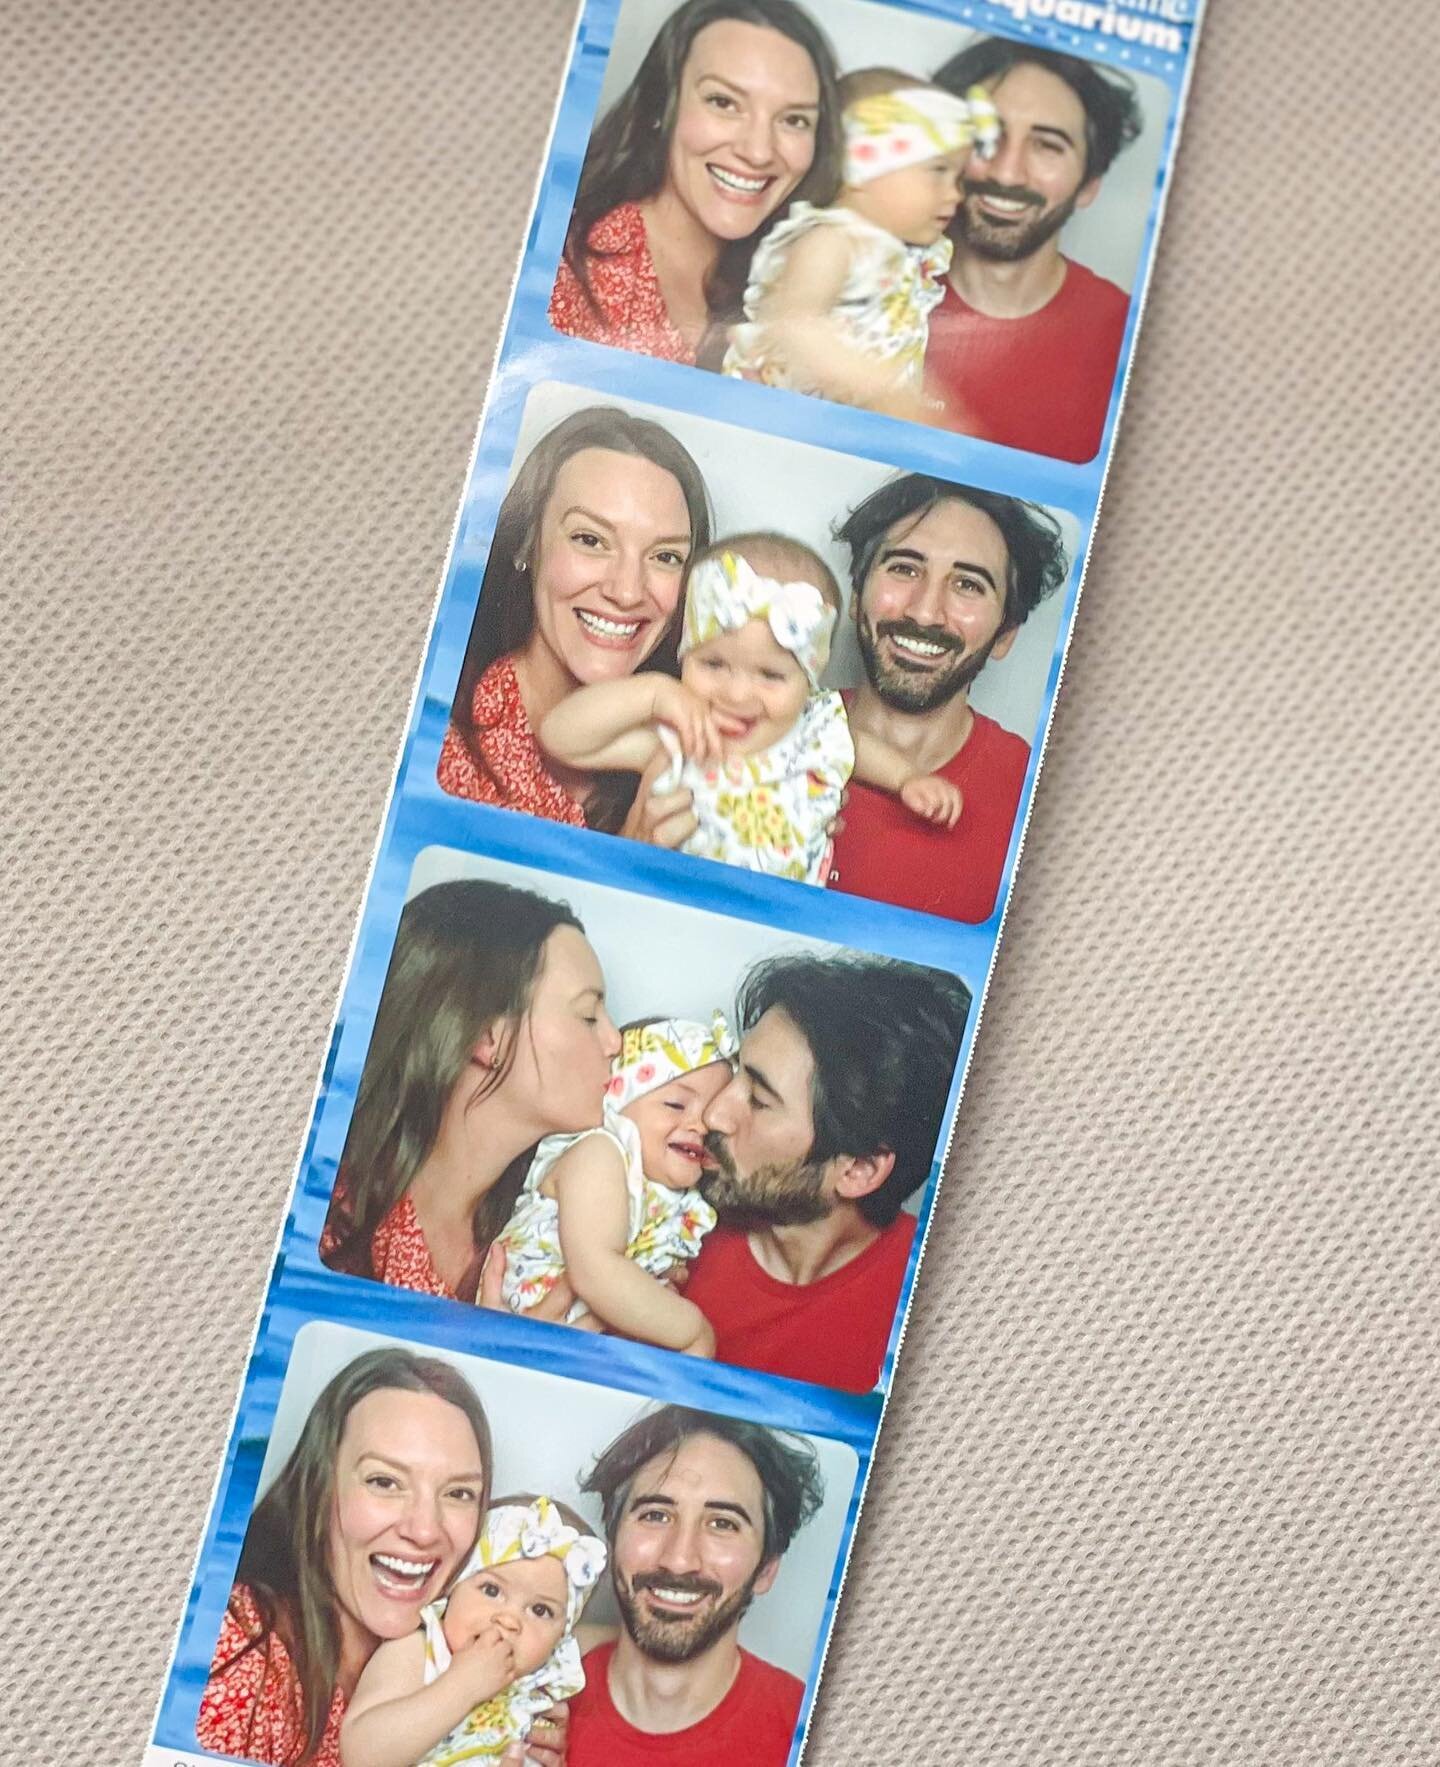 🌟O N E 🌟
-
Today is this little girl&rsquo;s first birthday!
-
I had something else planned to post today but then we ended up with this perfectly goofy, blurry, cheesy family photo strip and that&rsquo;s the real vibe. 
-
This milestone is just as